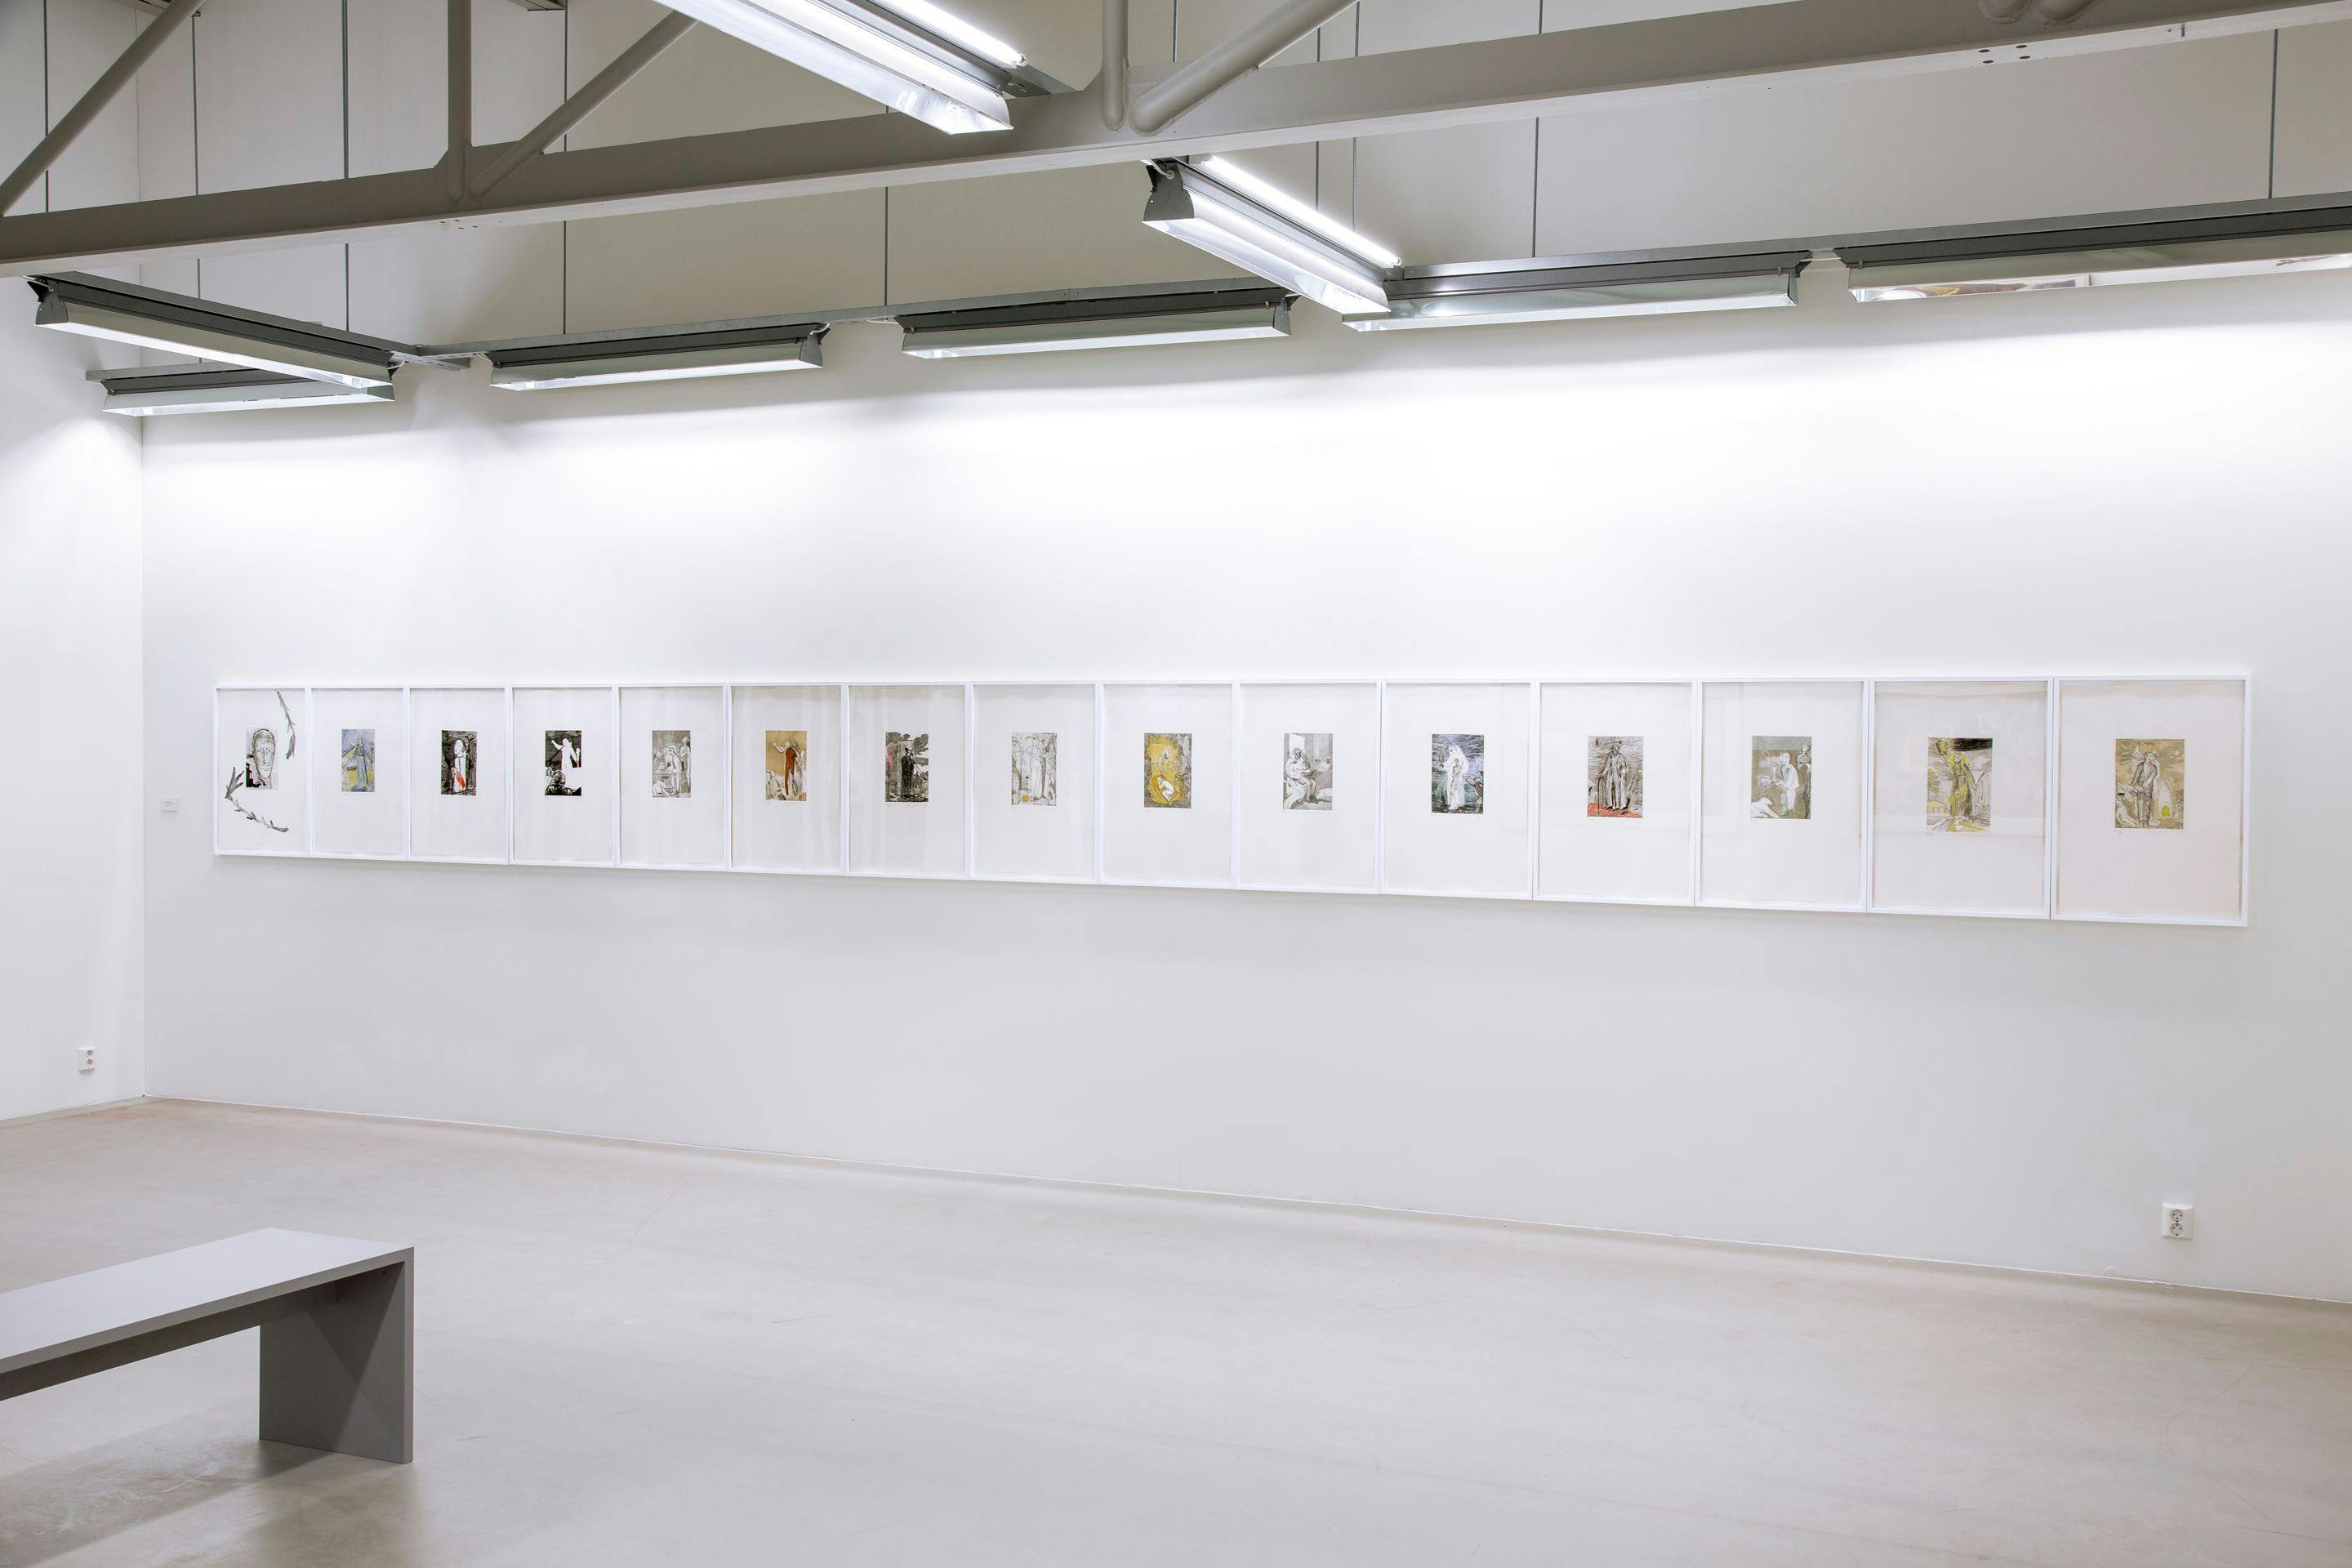 Installation view from the exhibition MIMMO PALADINO (Galleri Star, 2016)